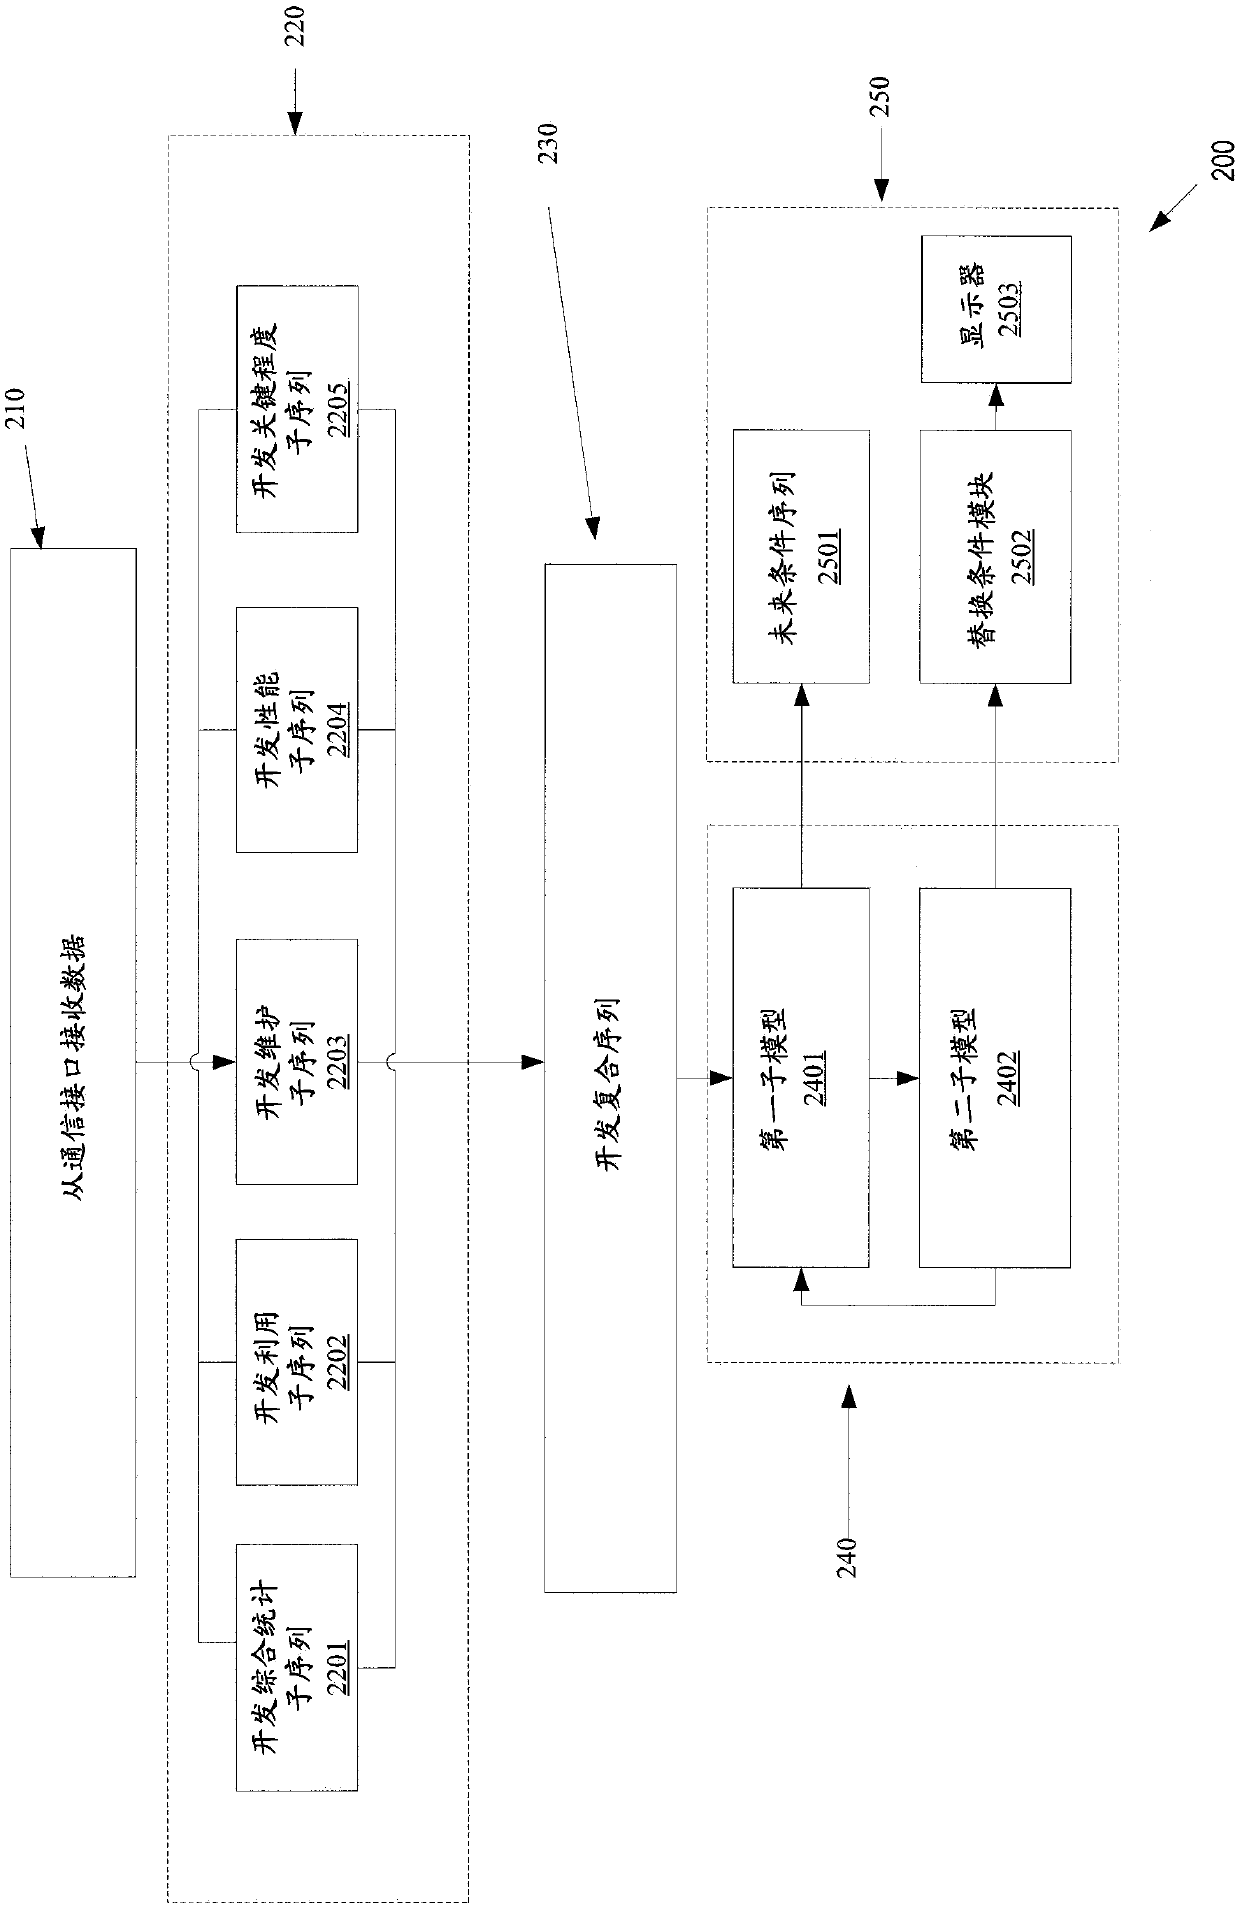 Electrical power transmission and distribution equipment event sequencing system